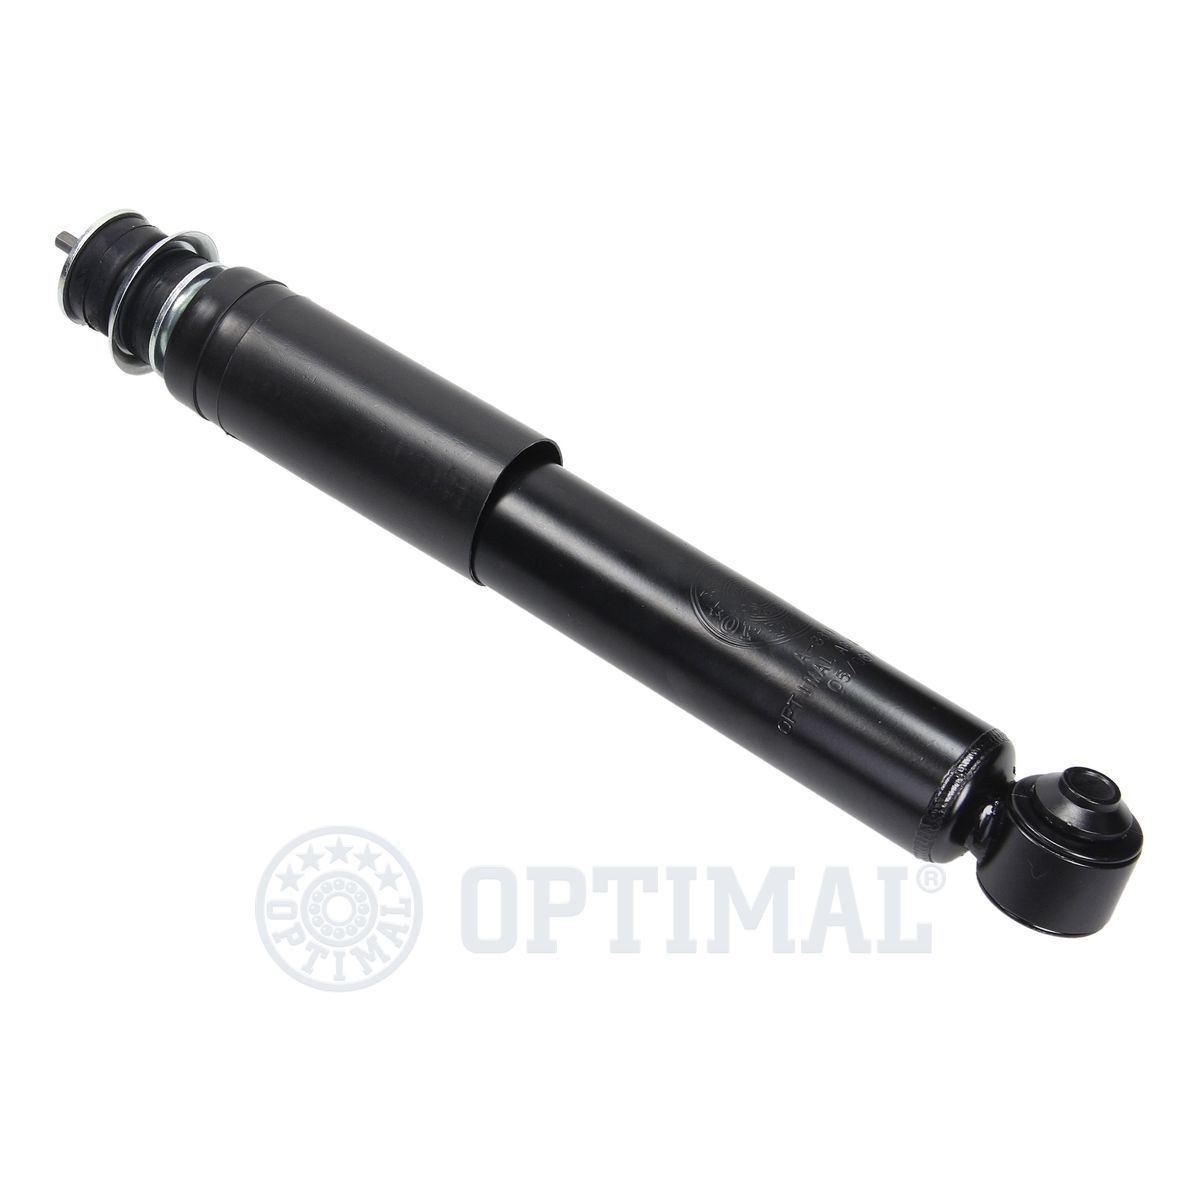 OPTIMAL A-3399G Shock absorber Front Axle, Gas Pressure, Twin-Tube, Telescopic Shock Absorber, Bottom eye, Top pin, M10x1.5